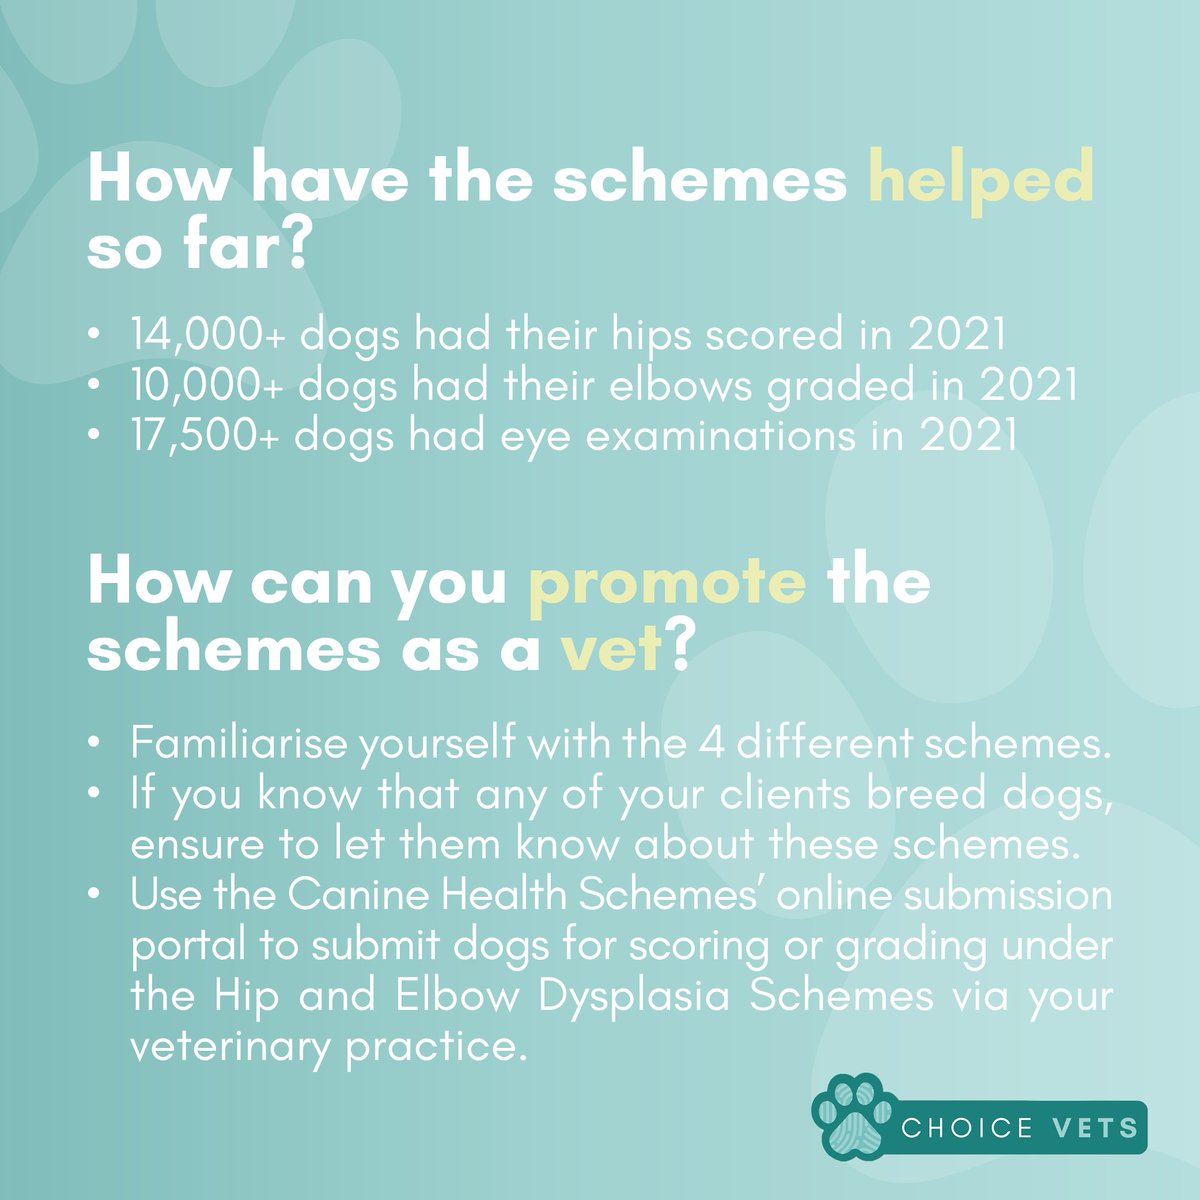 Are you passionate about improving #doghealth and welfare? 

If you haven't yet heard about #CanineHealthSchemes, we've put together a handy infographic with a summary of the schemes. Take a look! 👇

#dogwelfare #caninehealth #dogbreeding #dogbreeder #vets #veterinaryrecruitment